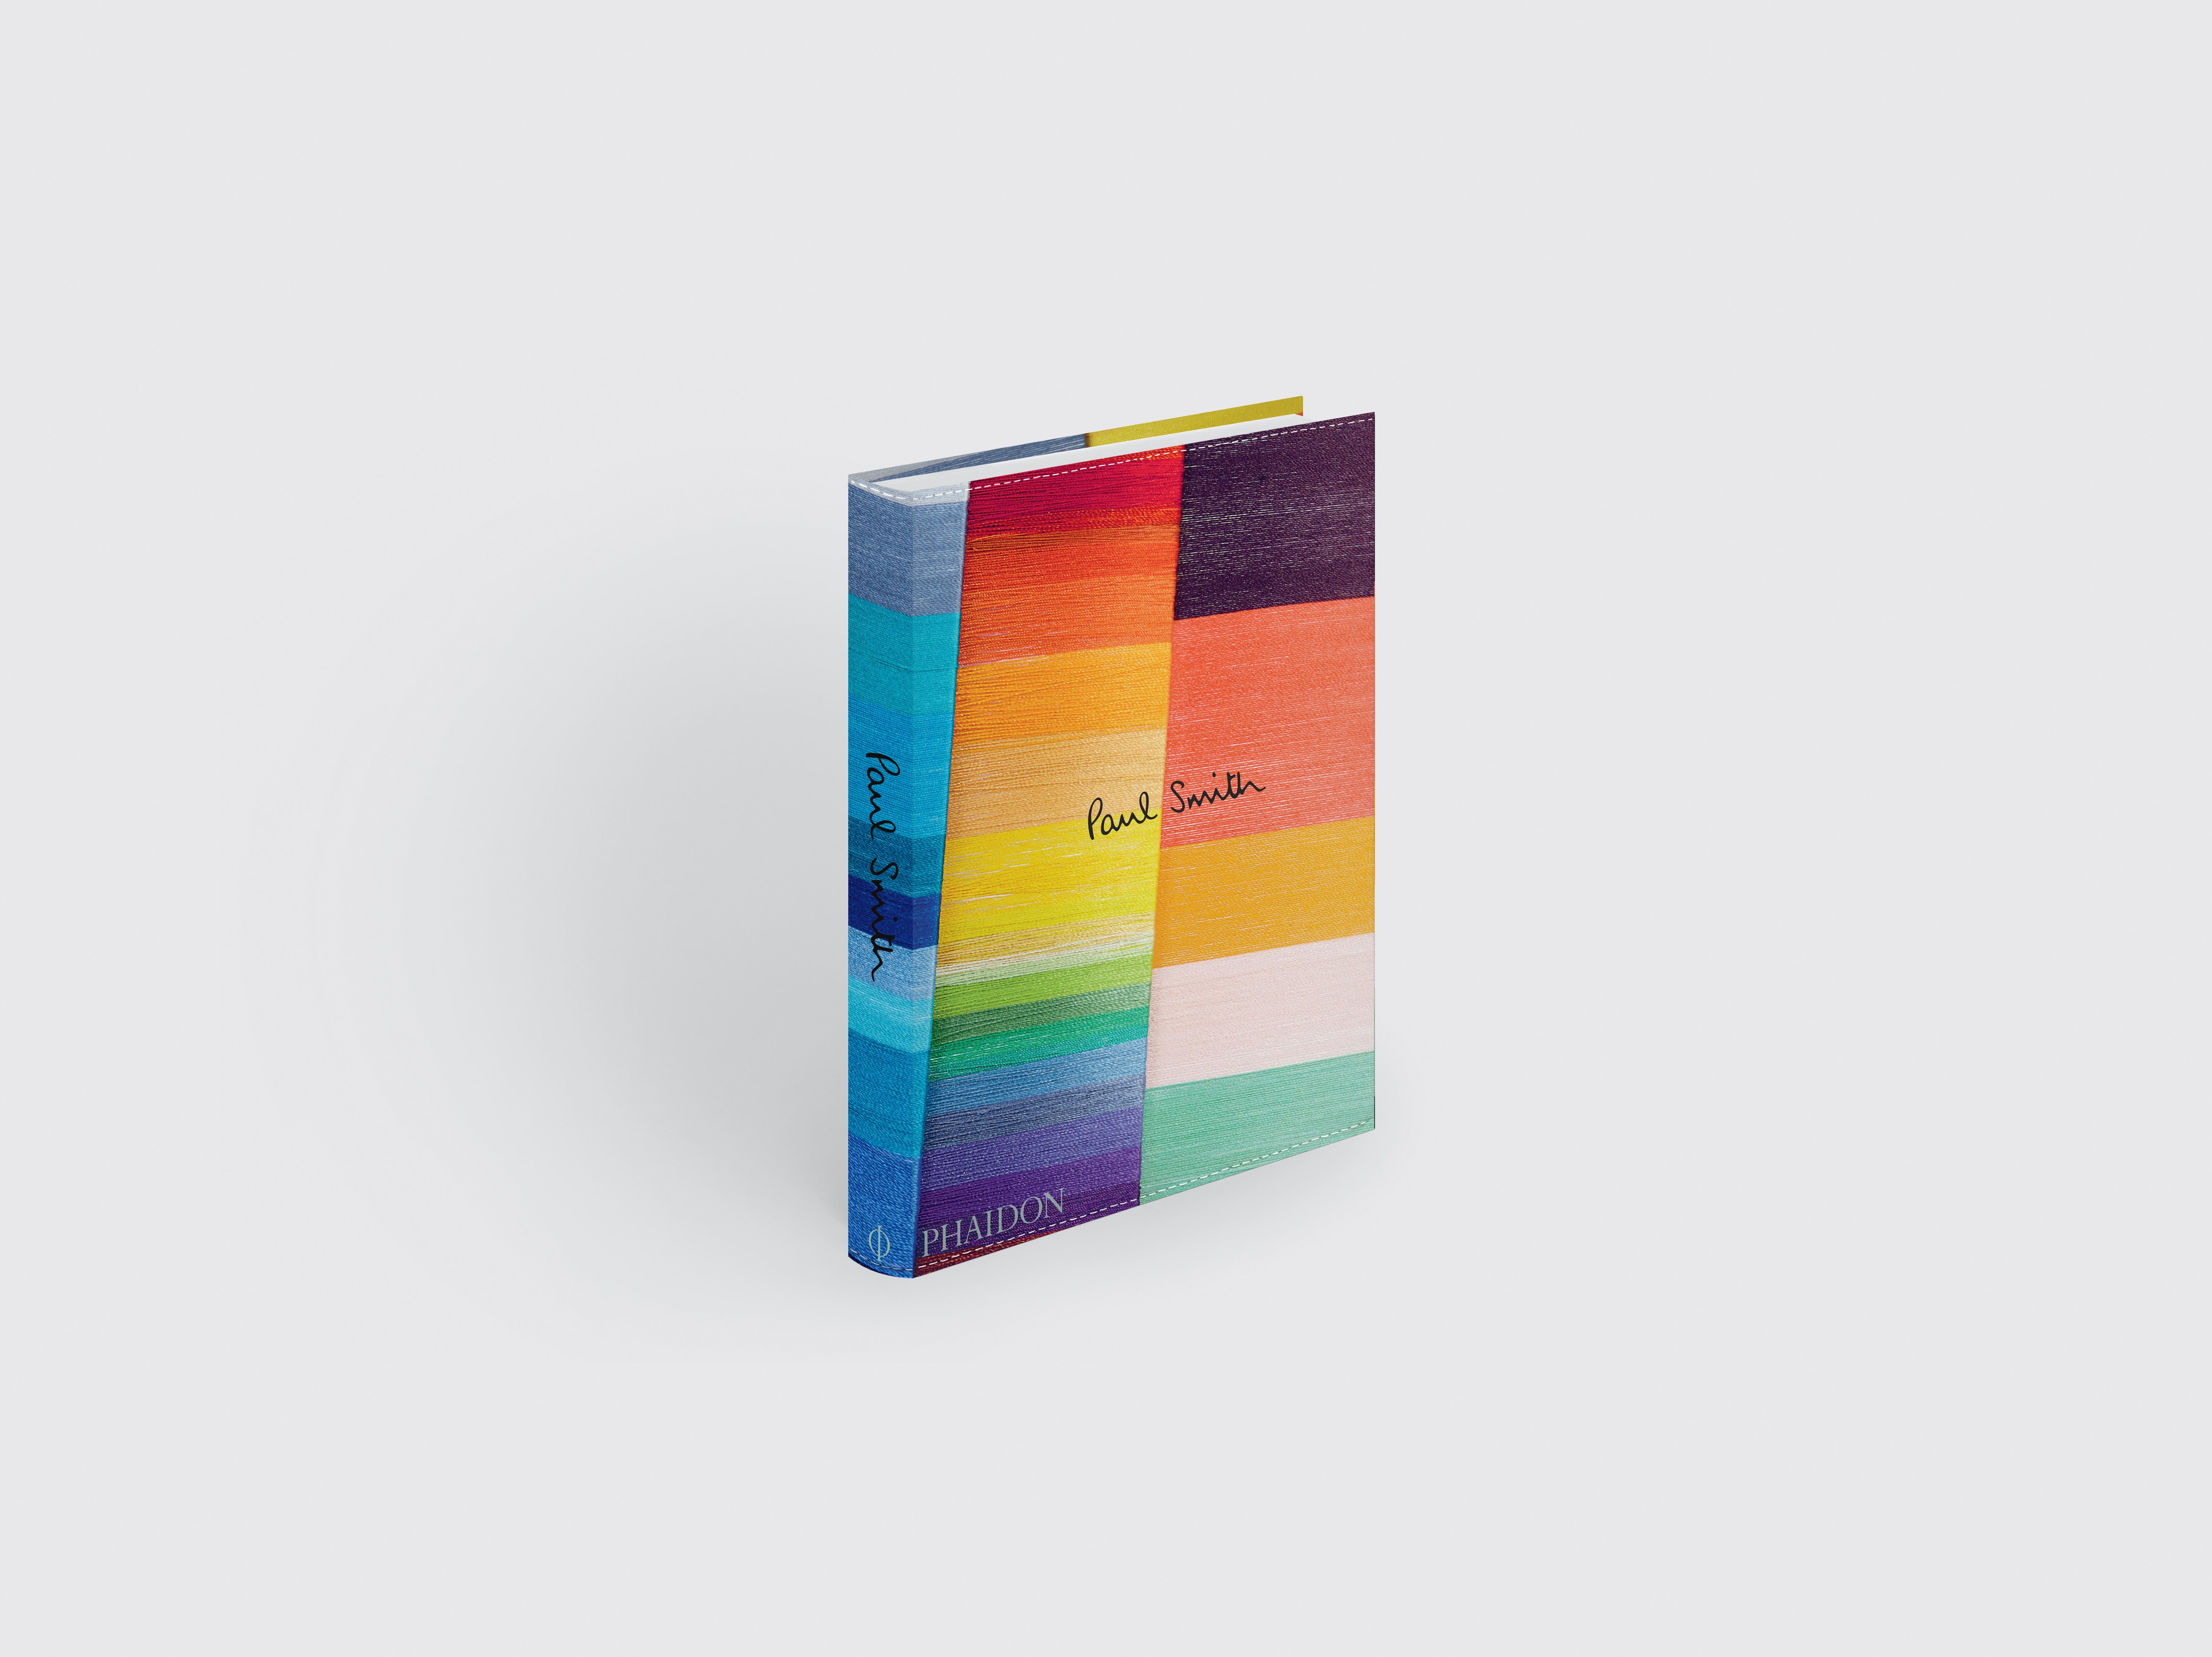 A timely celebration of British design legend Sir Paul Smith and his one of a kind creativity

This new monograph captures the unique spirit of British fashion icon Sir Paul Smith through 50 objects chosen by Sir Paul himself for the inspiration